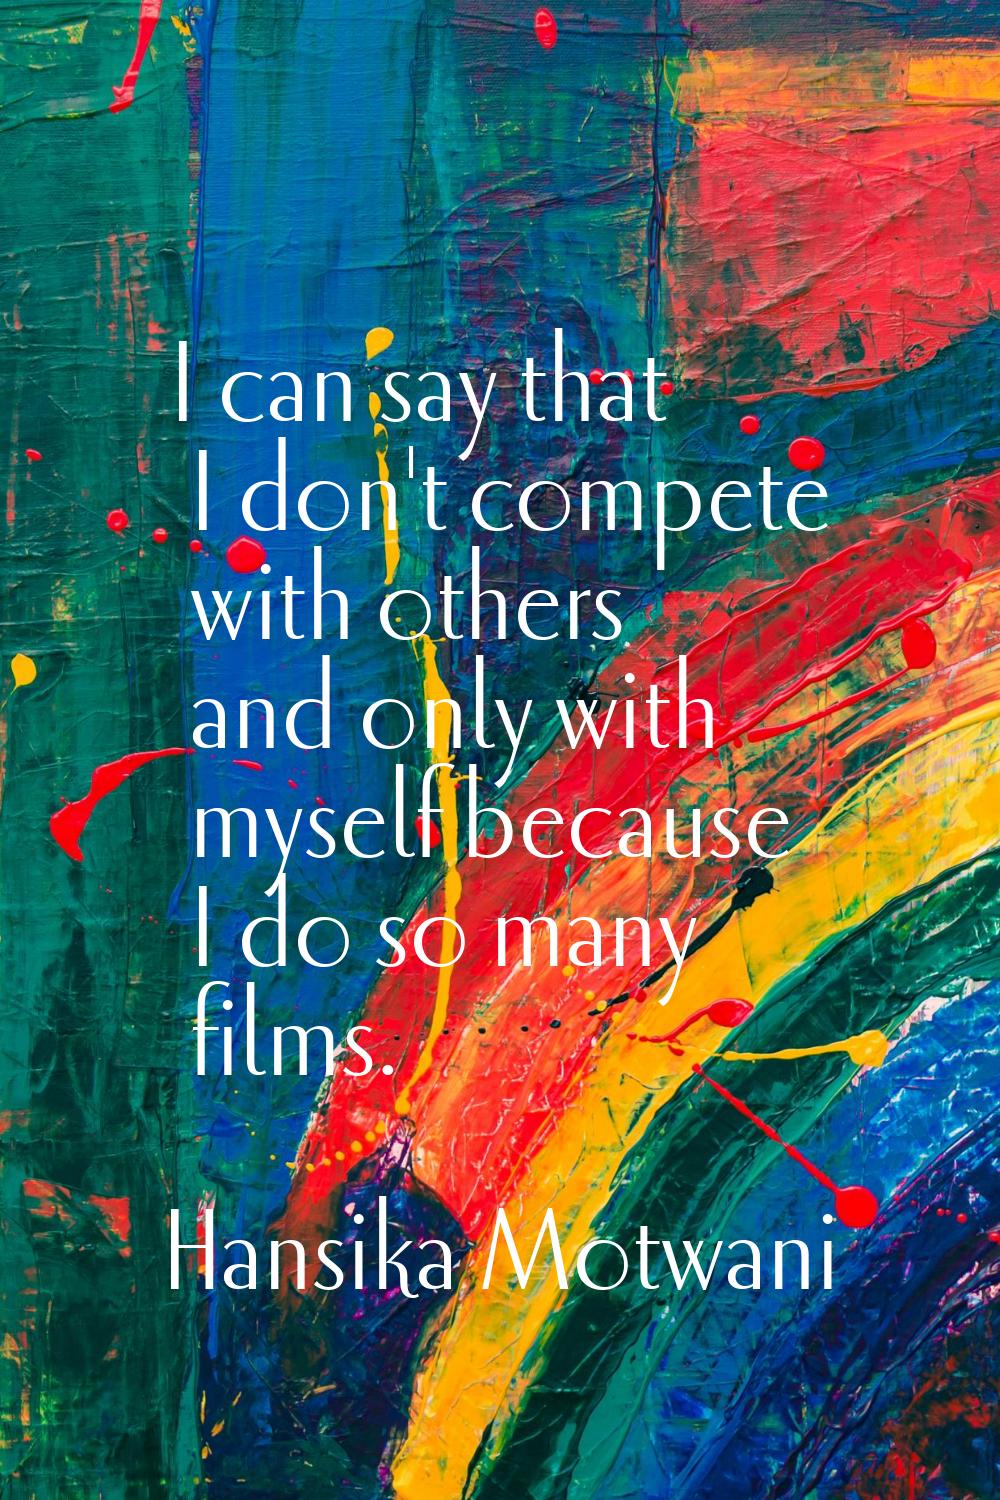 I can say that I don't compete with others and only with myself because I do so many films.